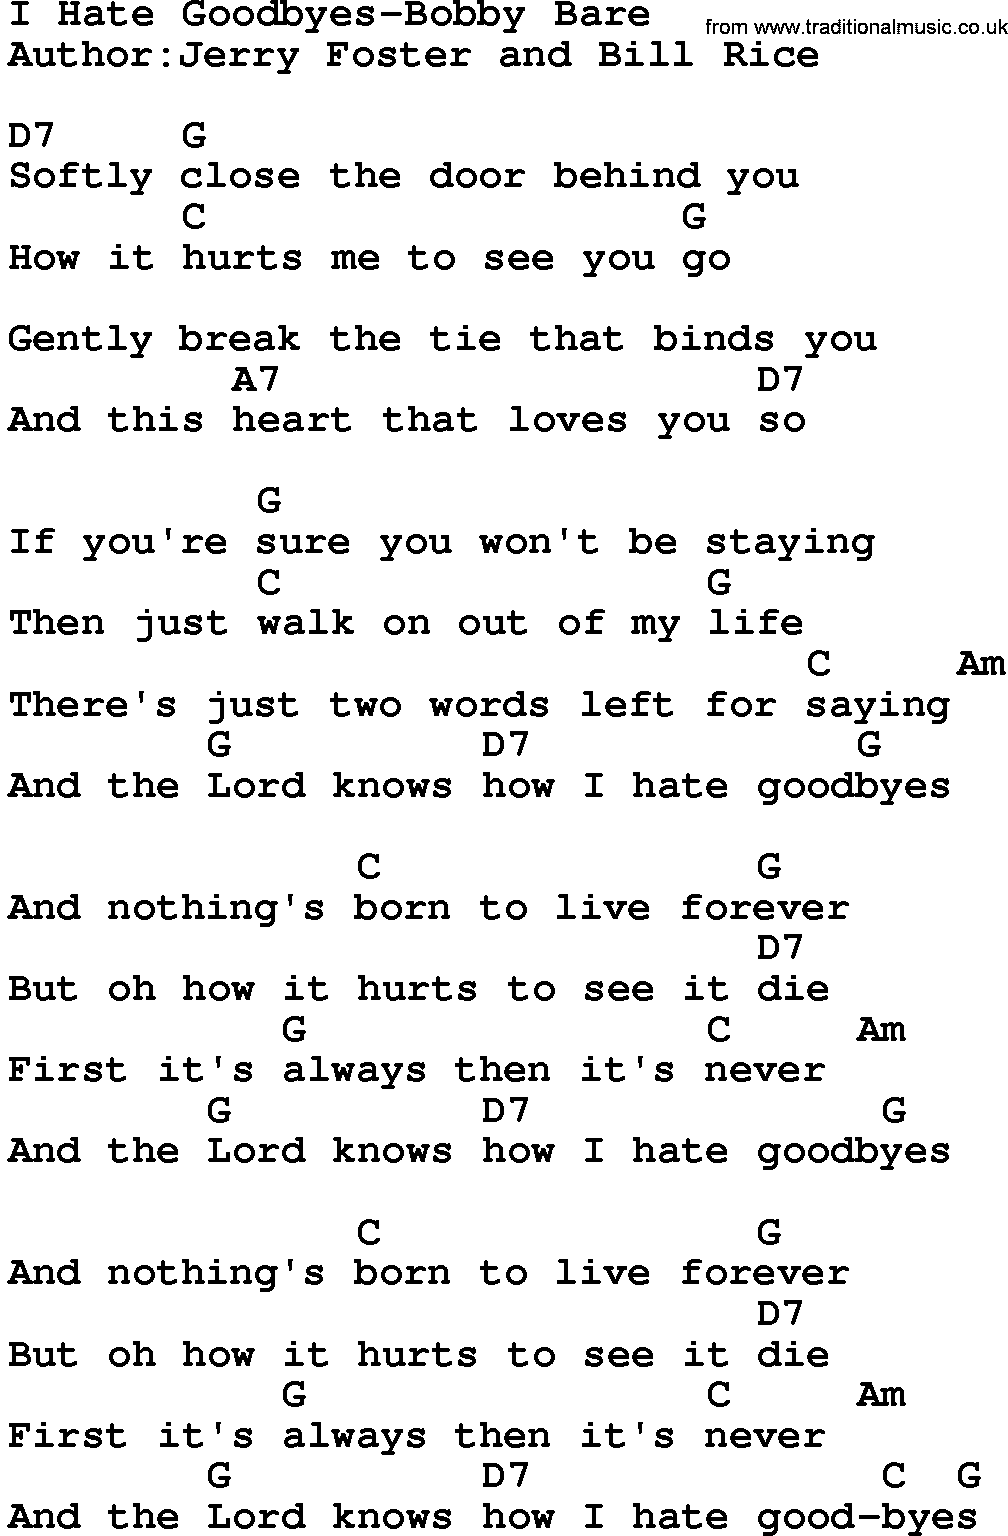 Country music song: I Hate Goodbyes-Bobby Bare lyrics and chords